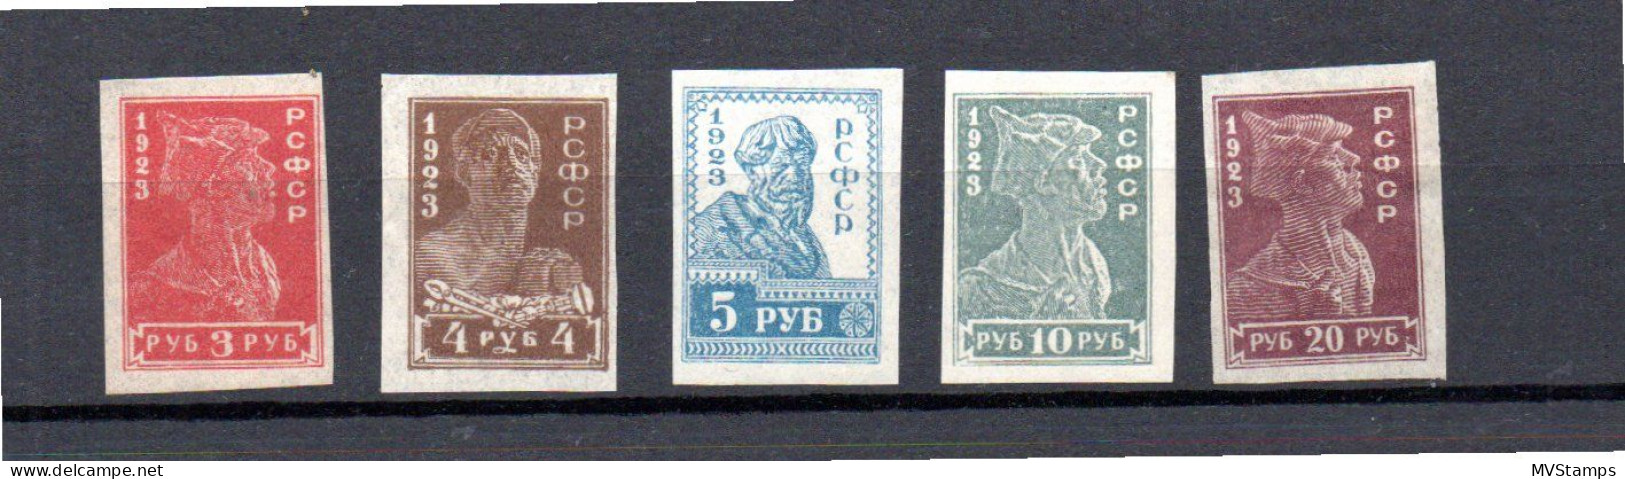 Russia 1923 Set Imperved Definitive Stamps (Michel 215/19 B) MLH - Usati